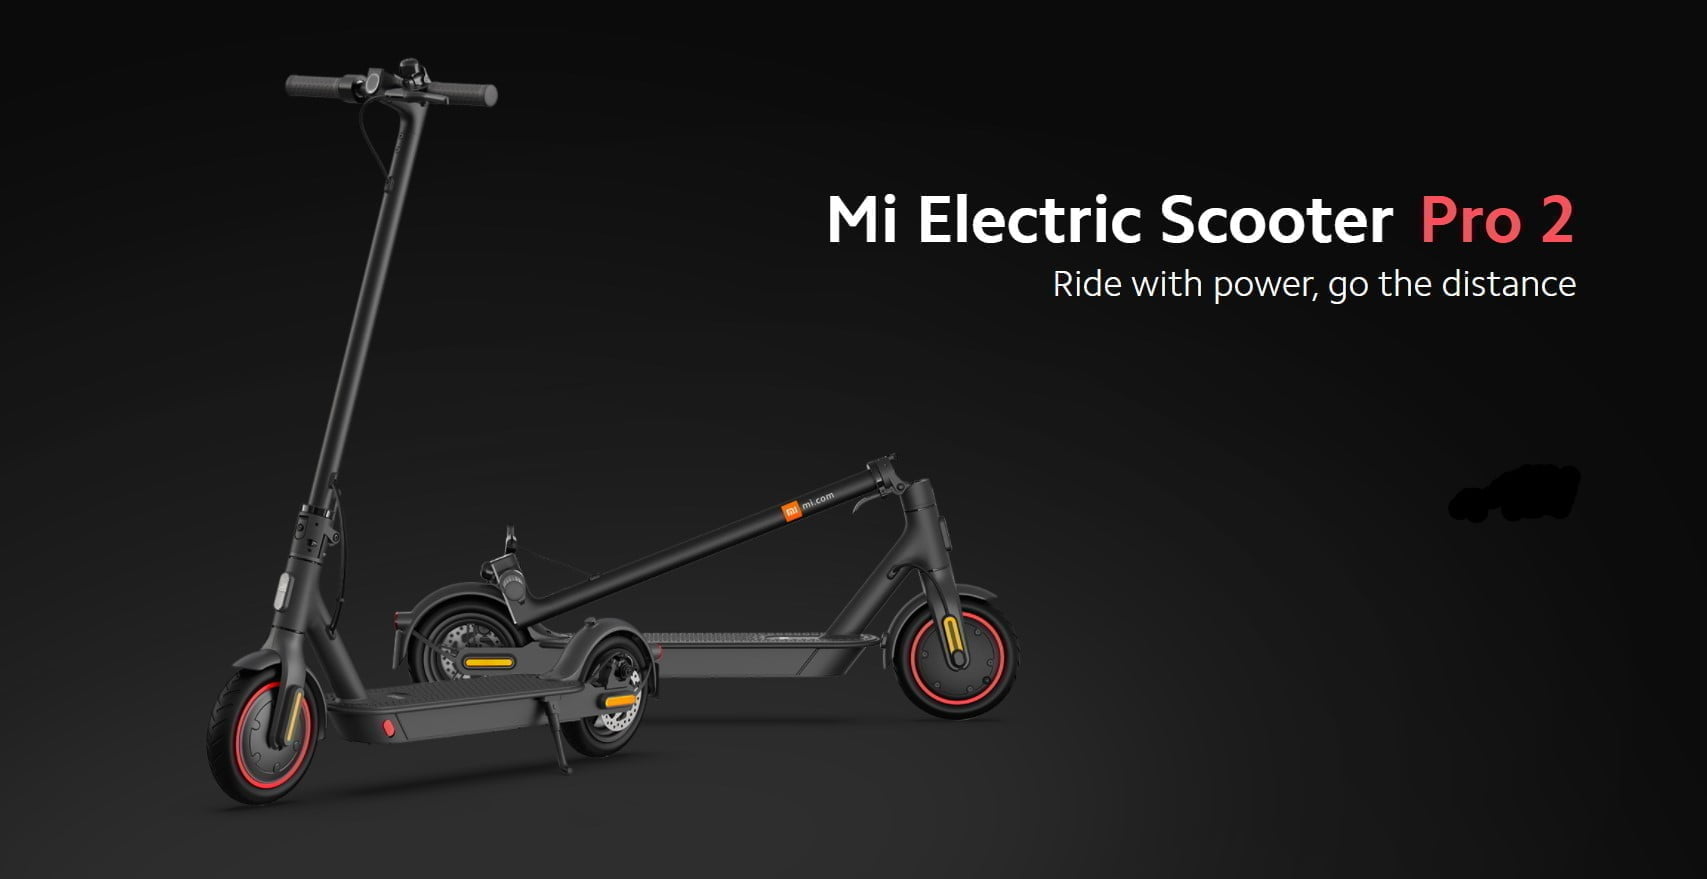 Screenshot 2021 02 27 185533 Xiaomi &Lt;H1&Gt;Mi Electric Scooterpro 2&Lt;/H1&Gt; &Lt;H2&Gt;Ride With Power, Go The Distance&Lt;/H2&Gt; &Lt;P Class=&Quot;Title&Quot;&Gt;Performance Upgrades That Will Take You Further: The Perfect Combination Of Practicality And Beauty, Taking You To Further Places.&Lt;/P&Gt; 600W Powerful Motor Performance Enjoy The Speed &Lt;P Class=&Quot;Title&Quot;&Gt;Three-Speed Modes, Easy Switch: When Commuting To Work, Press S To Go Faster. When Cruising Around The Park, Press D, And In Crowded Areas, You Can Turn On The Pedestrian Mode To Go Slower. Simply Double Press The Power Button To Switch Between Modes And Easily Adjust The Speed To Your Surroundings.&Lt;/P&Gt; High Safety Lithium Battery: 45Km Super Long-Range Battery New Generation Energy Recovery System: Convert Kinetic Energy Into Electrical Energy For Longer Battery Life Central Controls Designed For A Better Riding Experience Easy To Control, Try And You Will Know &Lt;P Class=&Quot;Title&Quot;&Gt;Fold It Up In 3 Seconds&Lt;/P&Gt; Fifth-Generation Bms Smart Battery Management System